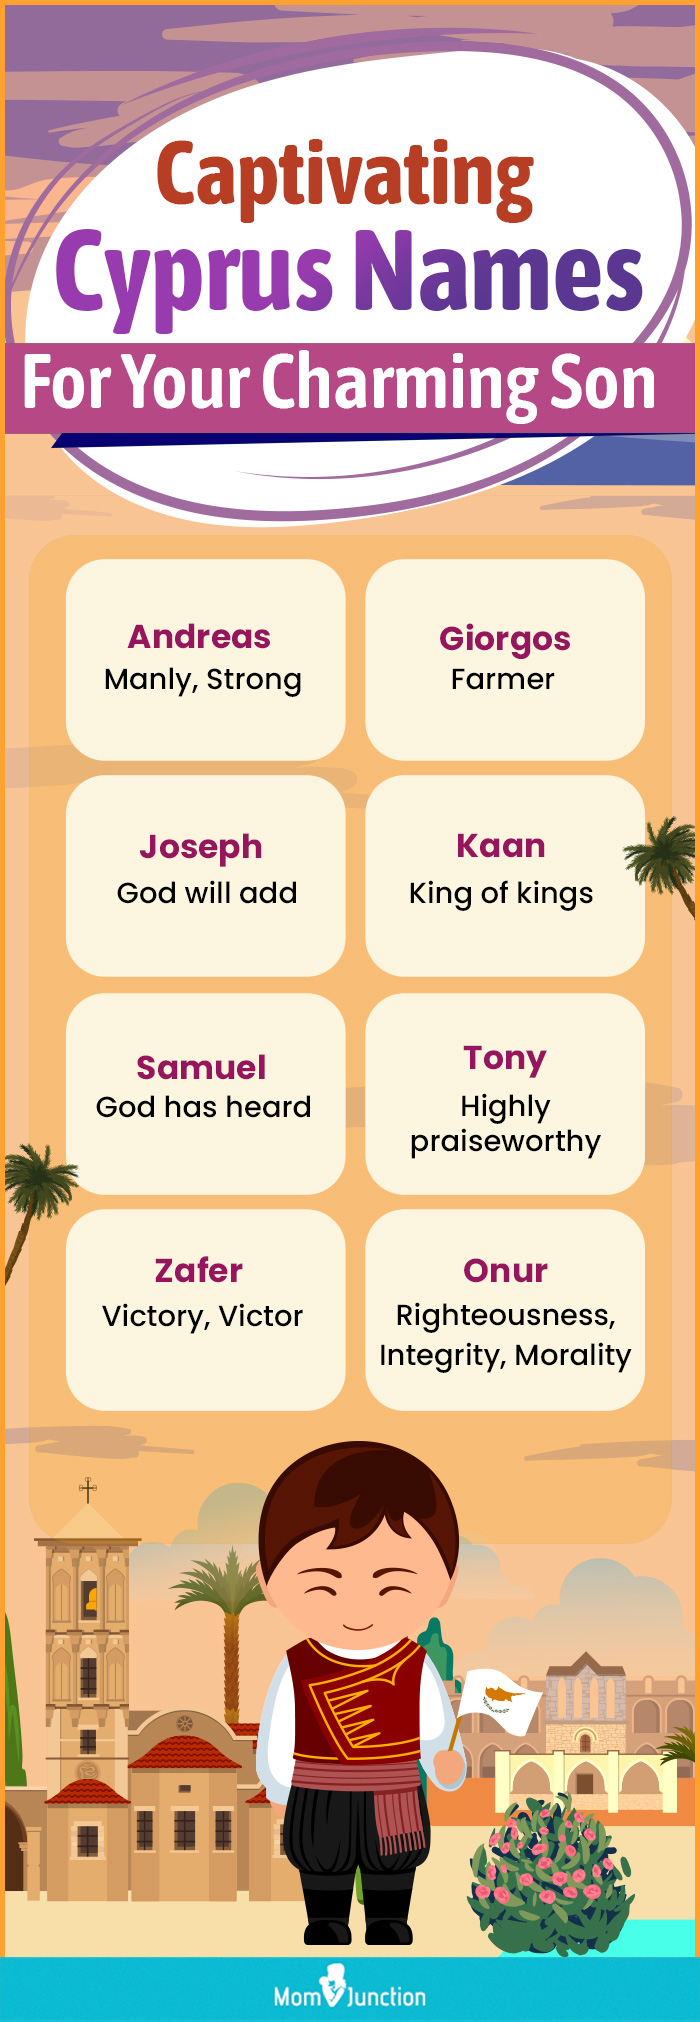 captivating cyprus names for your charming son (infographic)